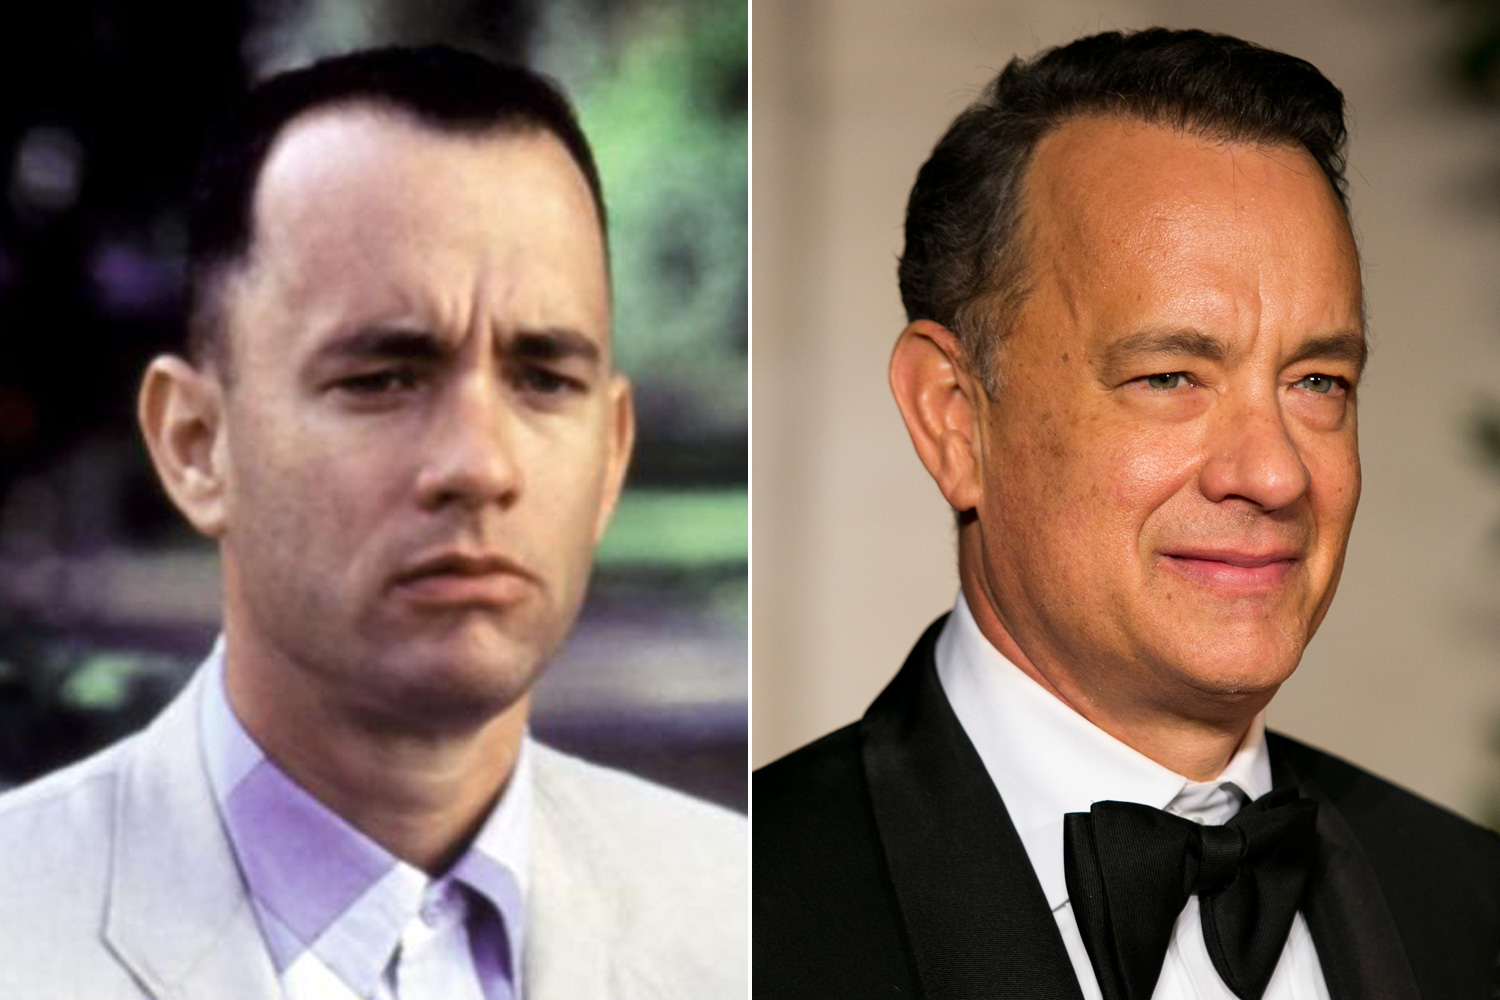 Tom Hanks his second consecutive Best Actor Academy Award for  Forrest Gump  in 1995 and has been a mainstay of Hollywood's A-List ever since. Most recently, he narrowly missed out on an Oscar nomination for his heralded  Captain Phillips  performance.